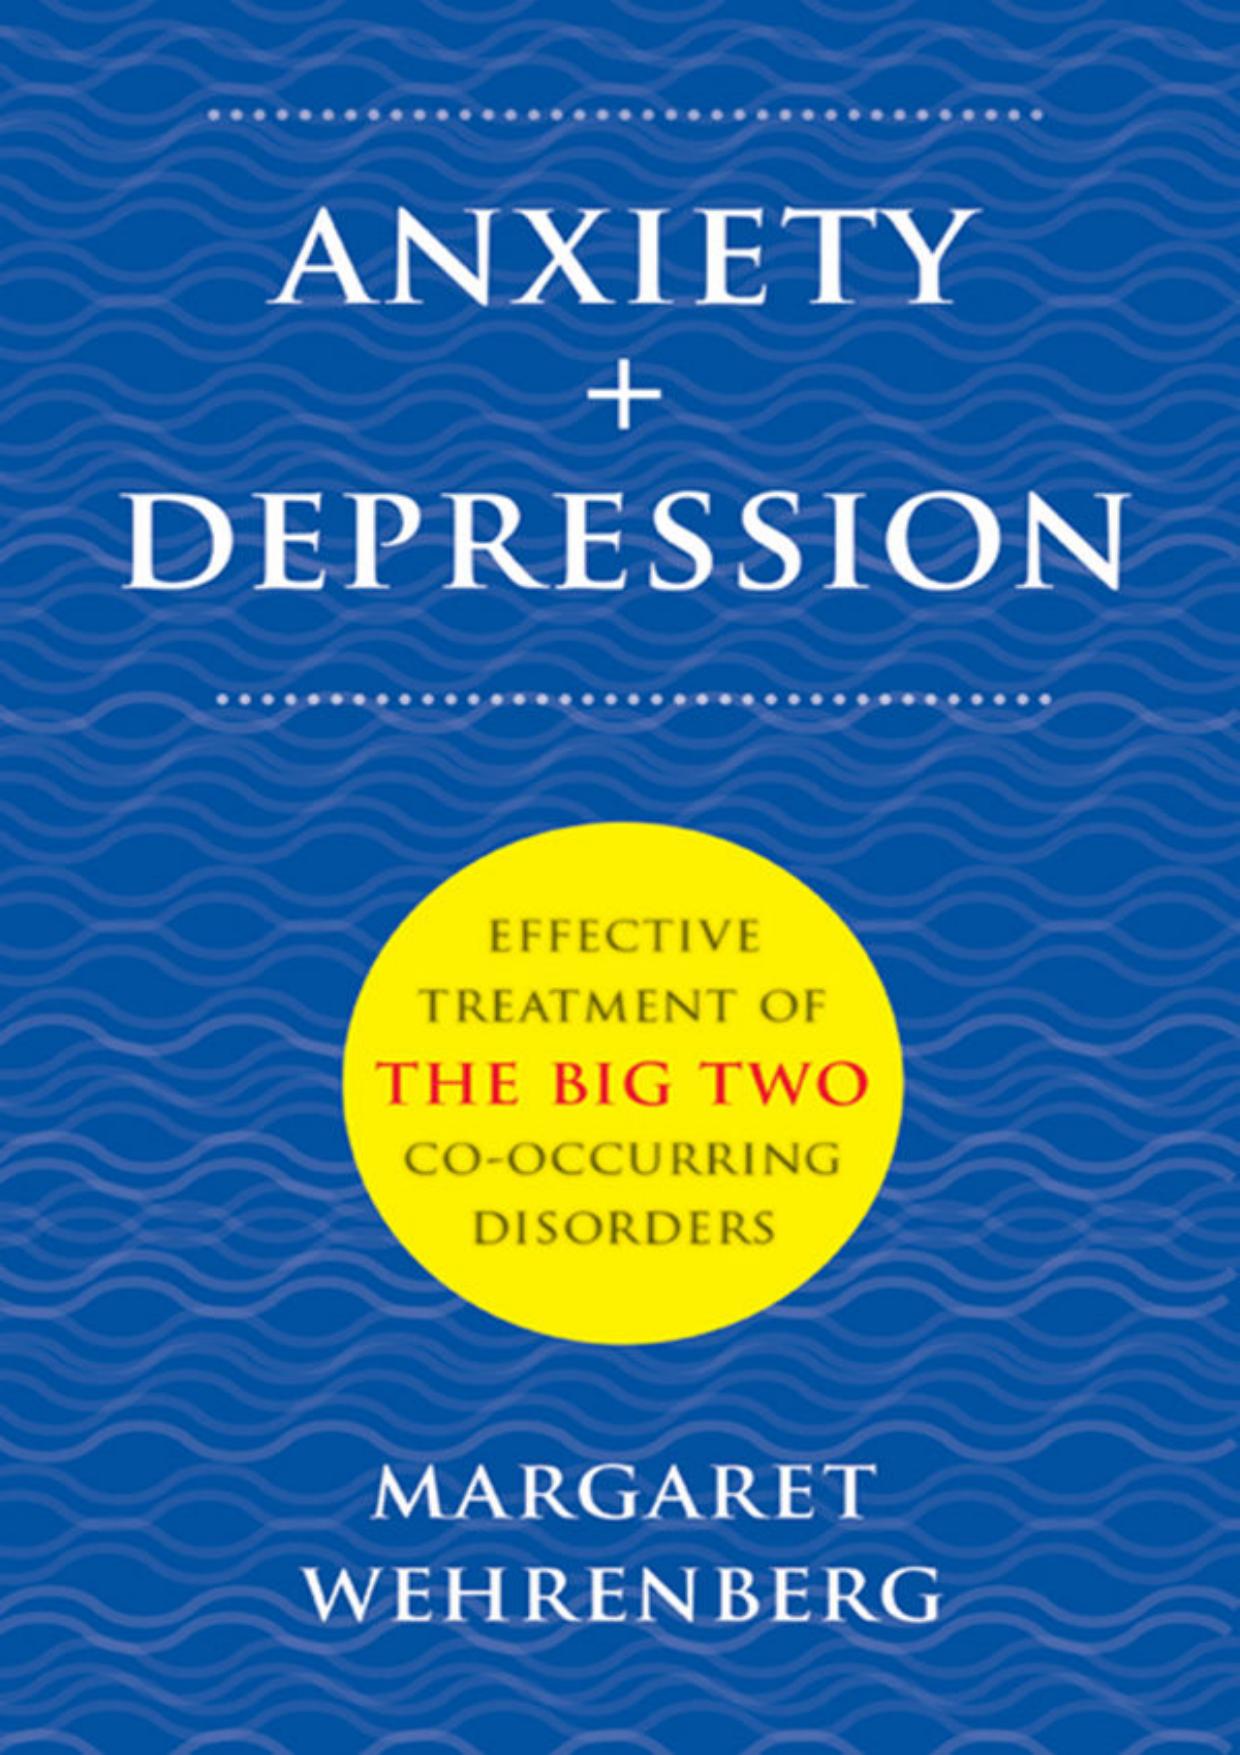 (eBook PDF)Anxiety + Depression: Effective Treatment of the Big Two Co-Occurring Disorders by Margaret Wehrenberg